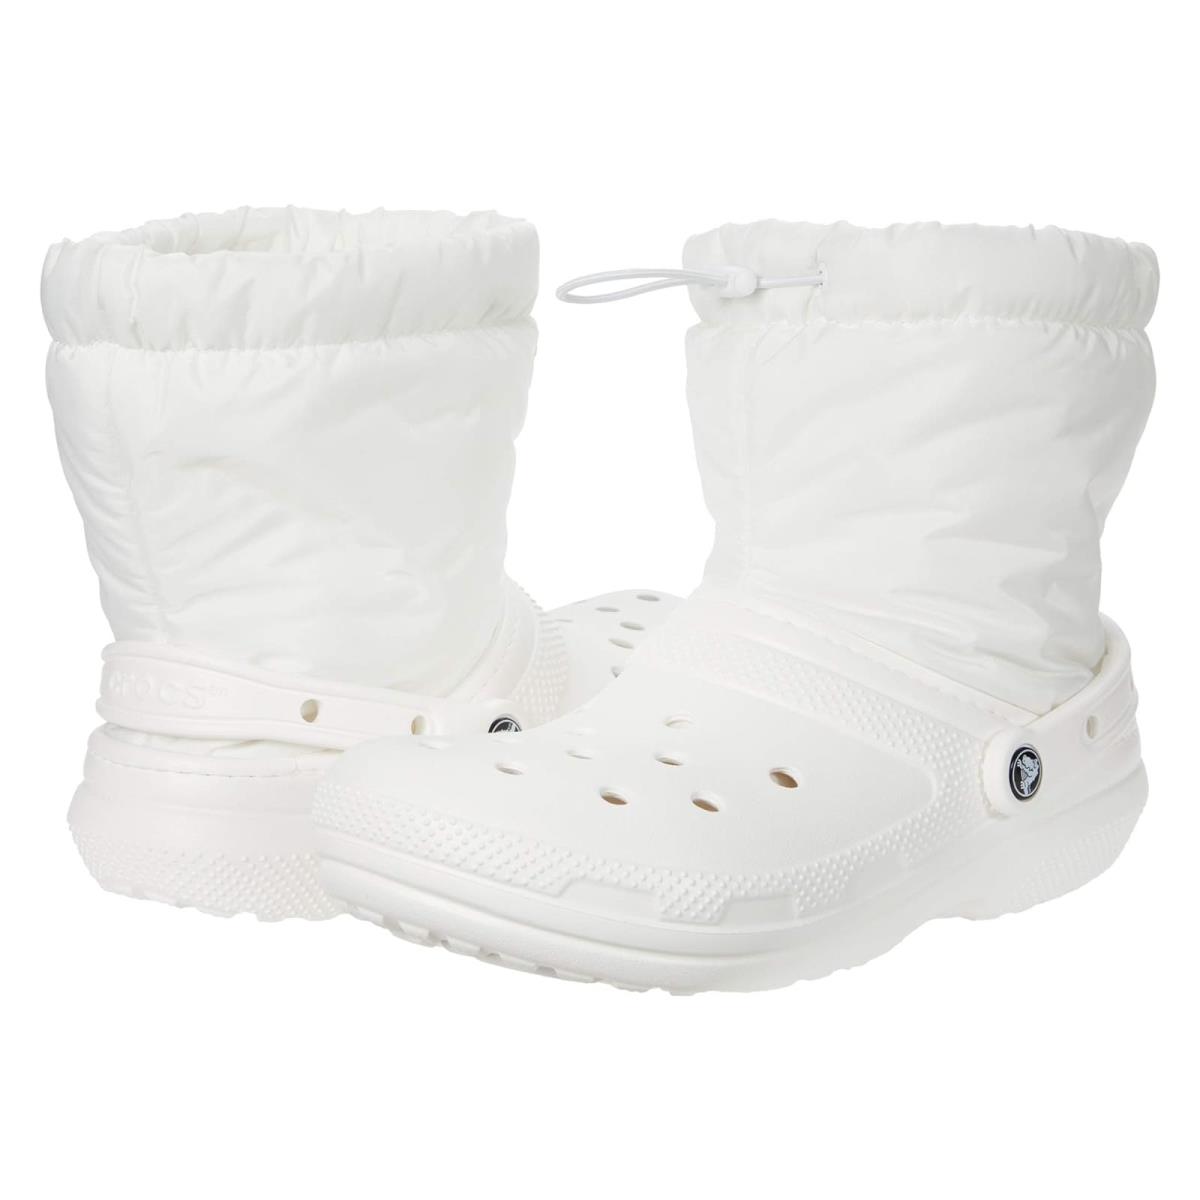 Unisex Boots Crocs Classic Lined Neo Puff Boot White/White